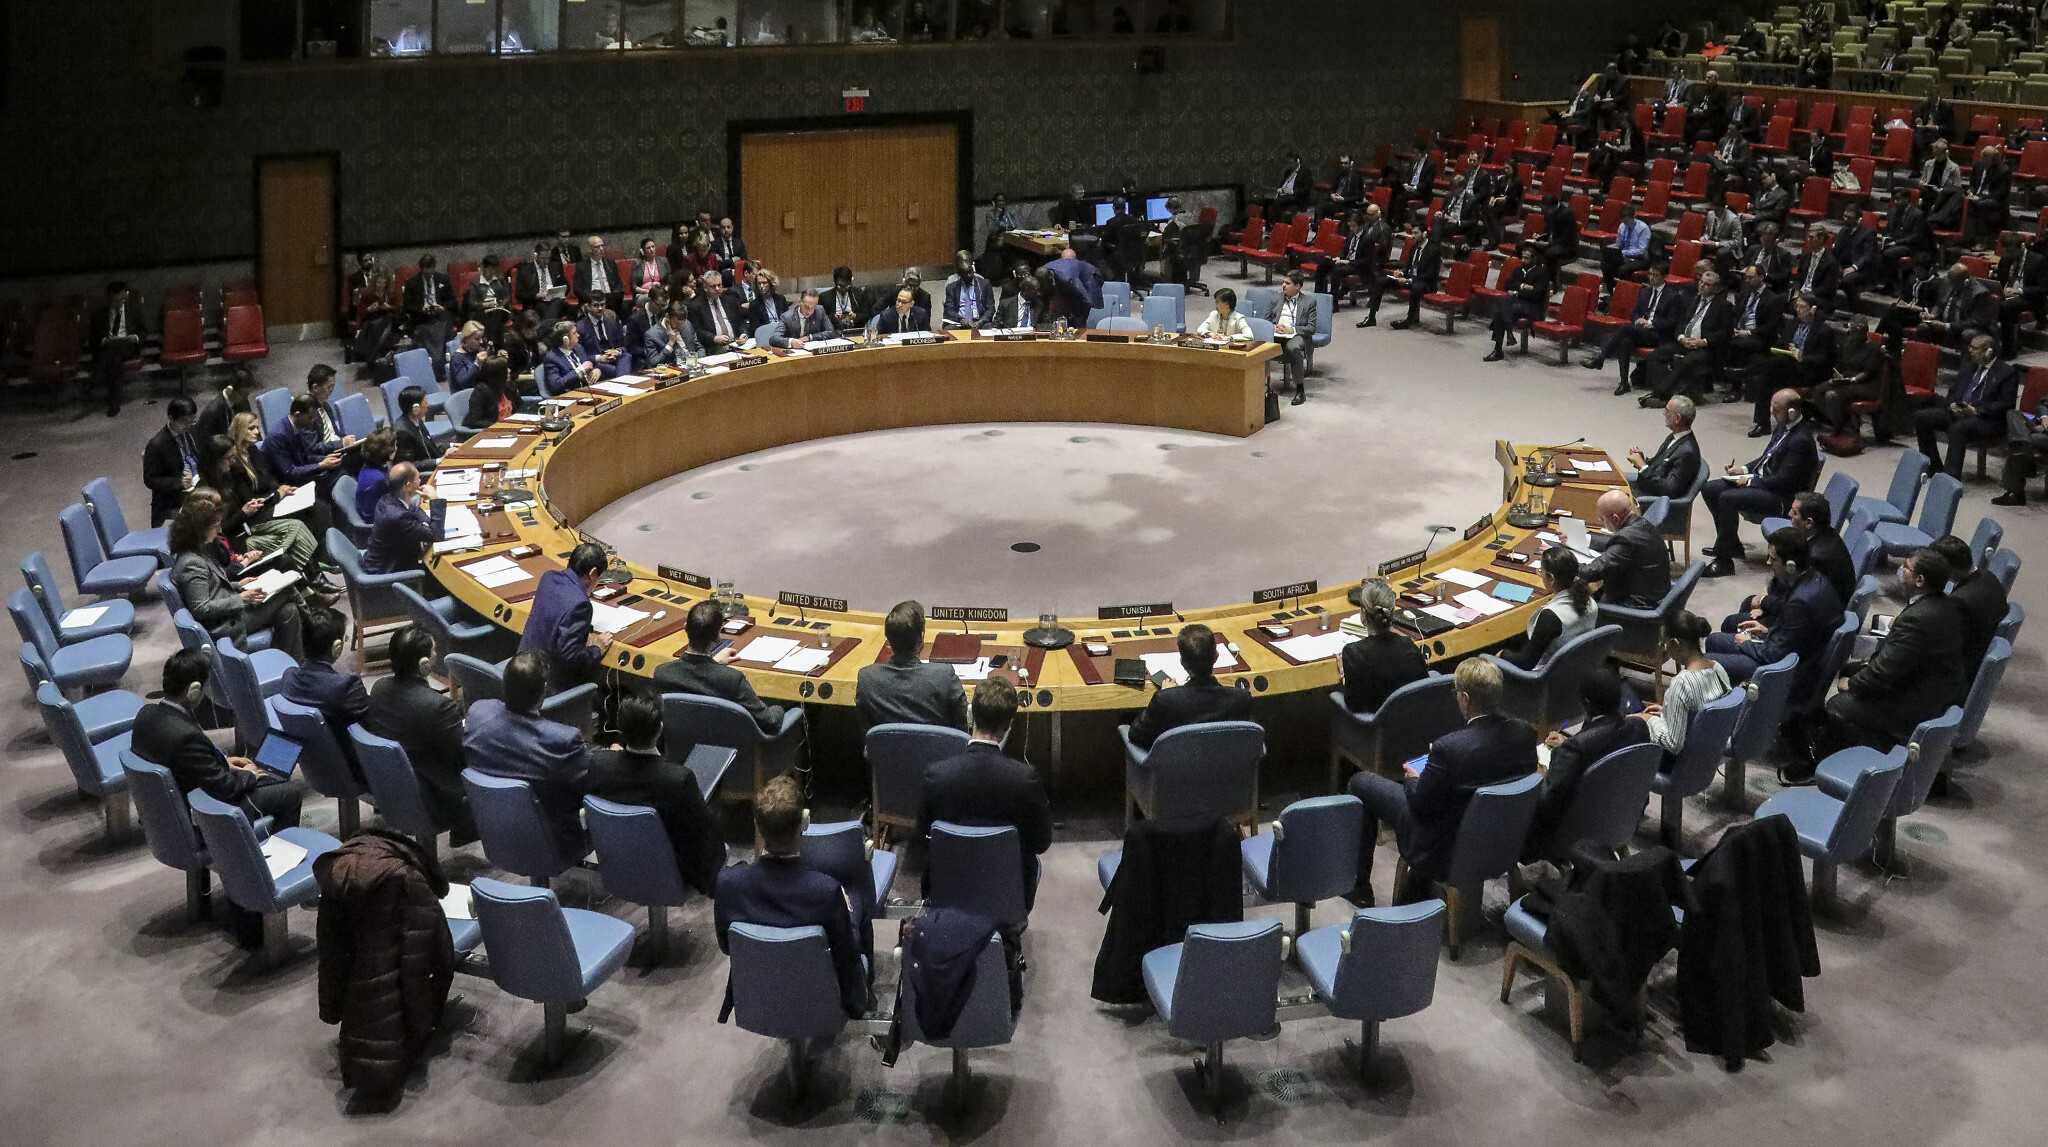 Exec tells first UN council meeting that big tech can't be trusted to